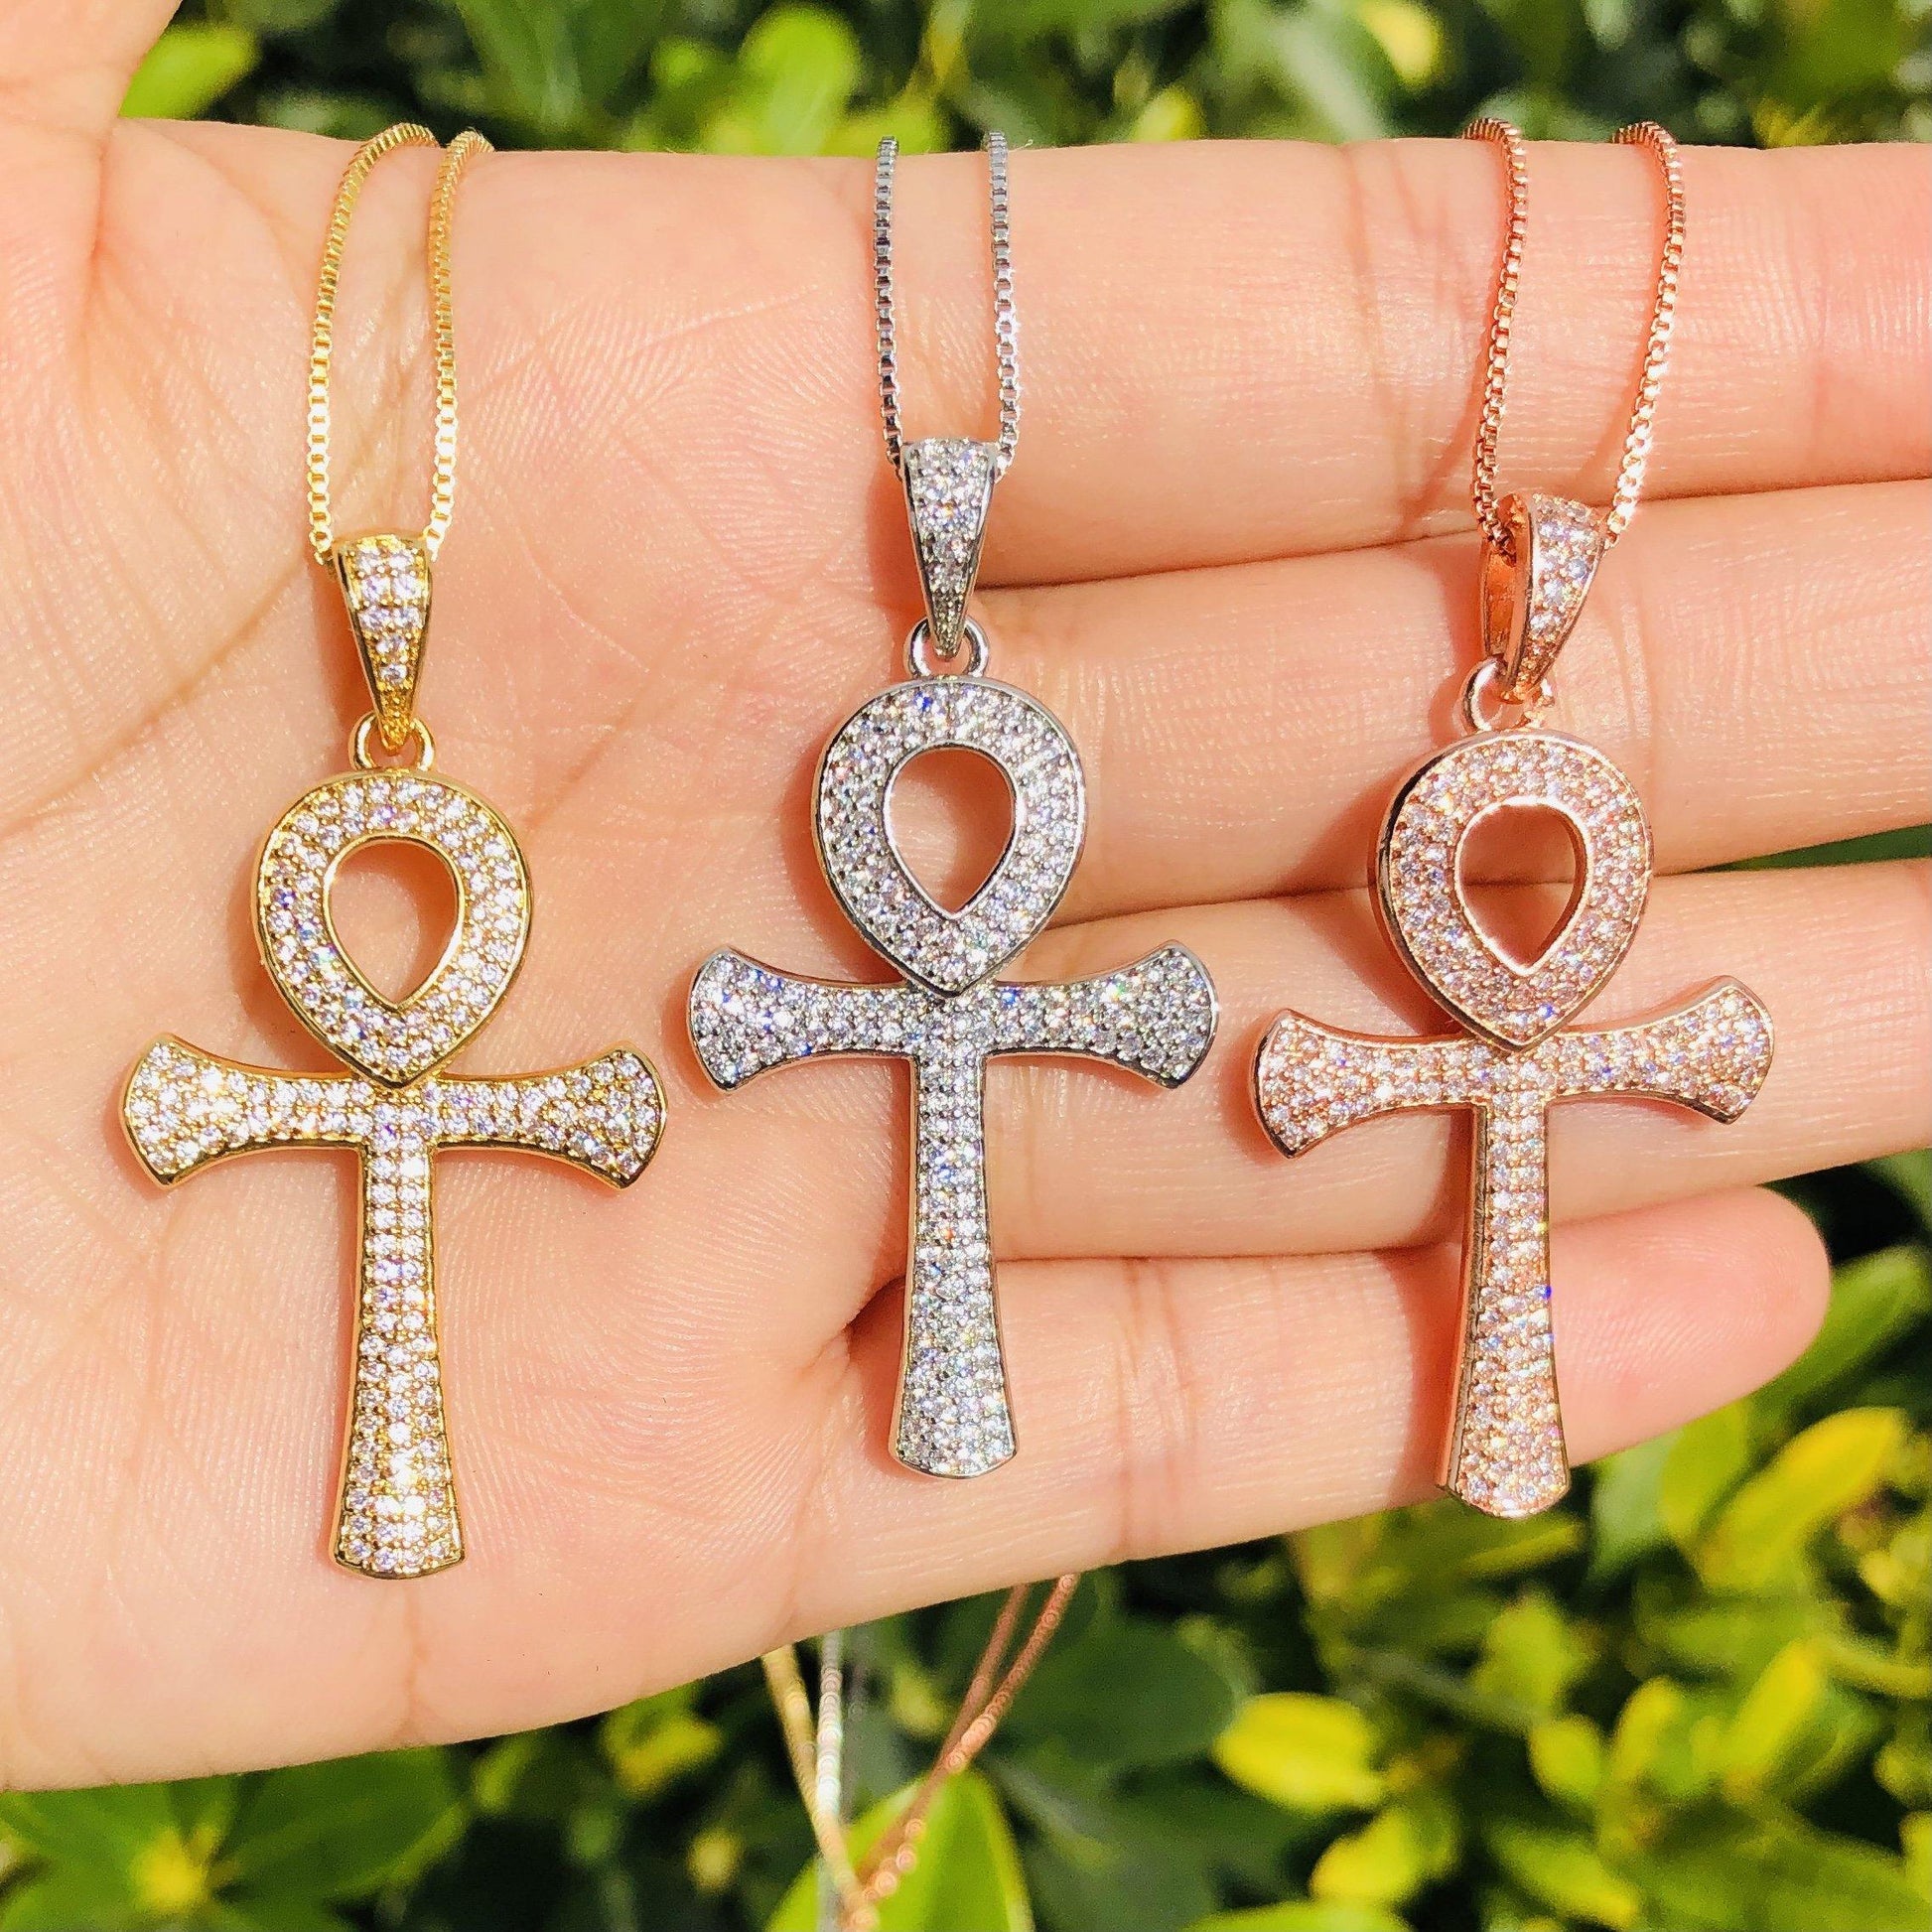 5pcs/lot 45*23.3mm CZ Paved Ankh Necklaces Necklaces Charms Beads Beyond